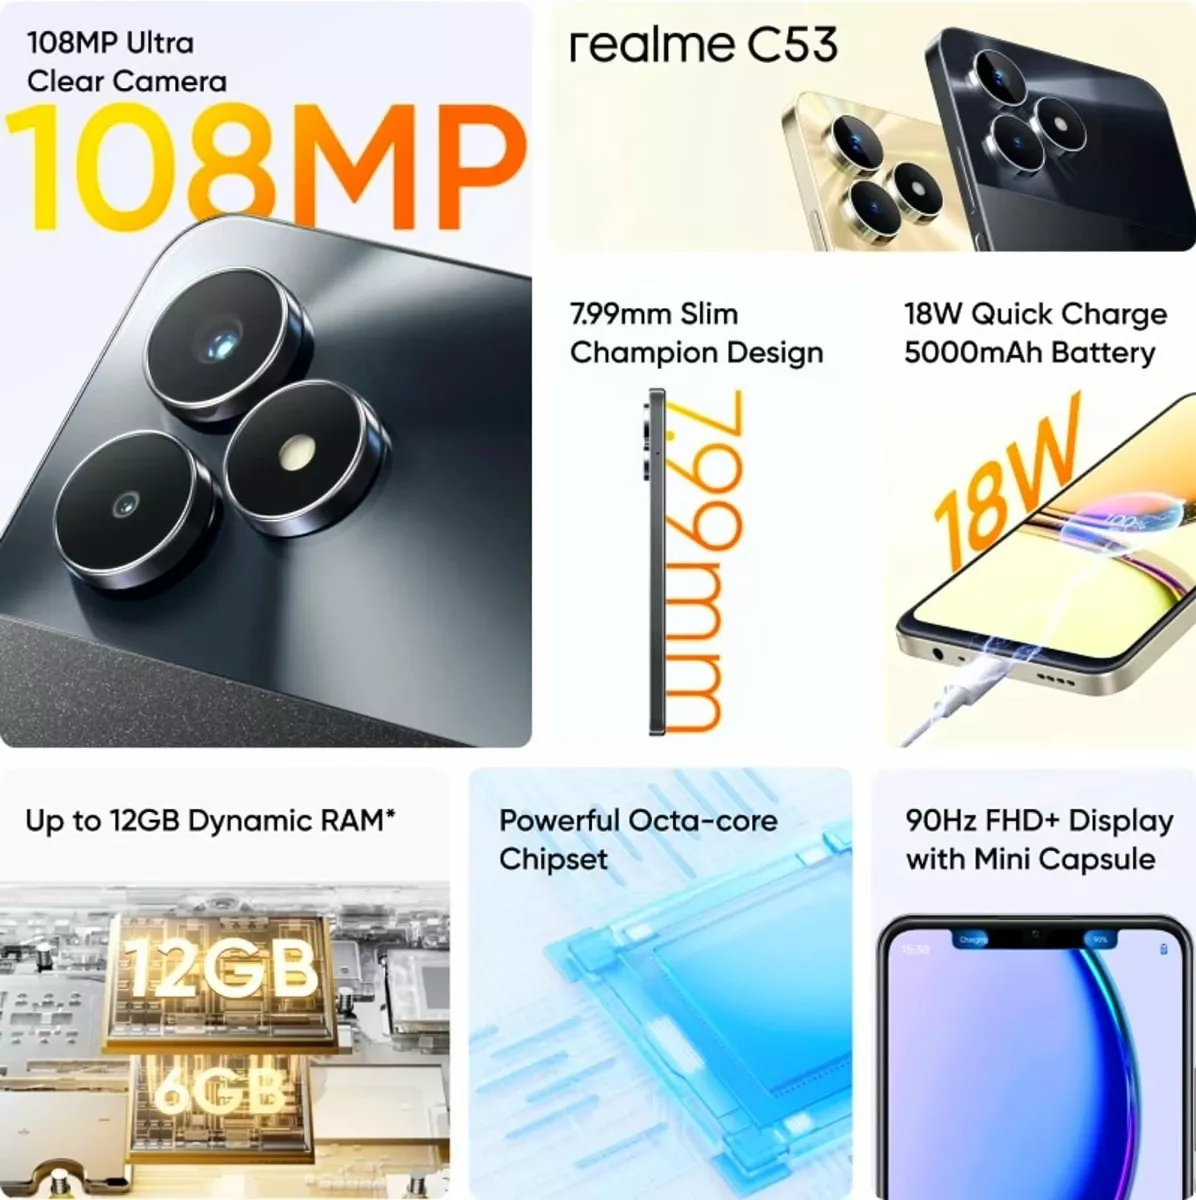 Realme C53 with 108MP camera launched in India, price starts at ₹9,999